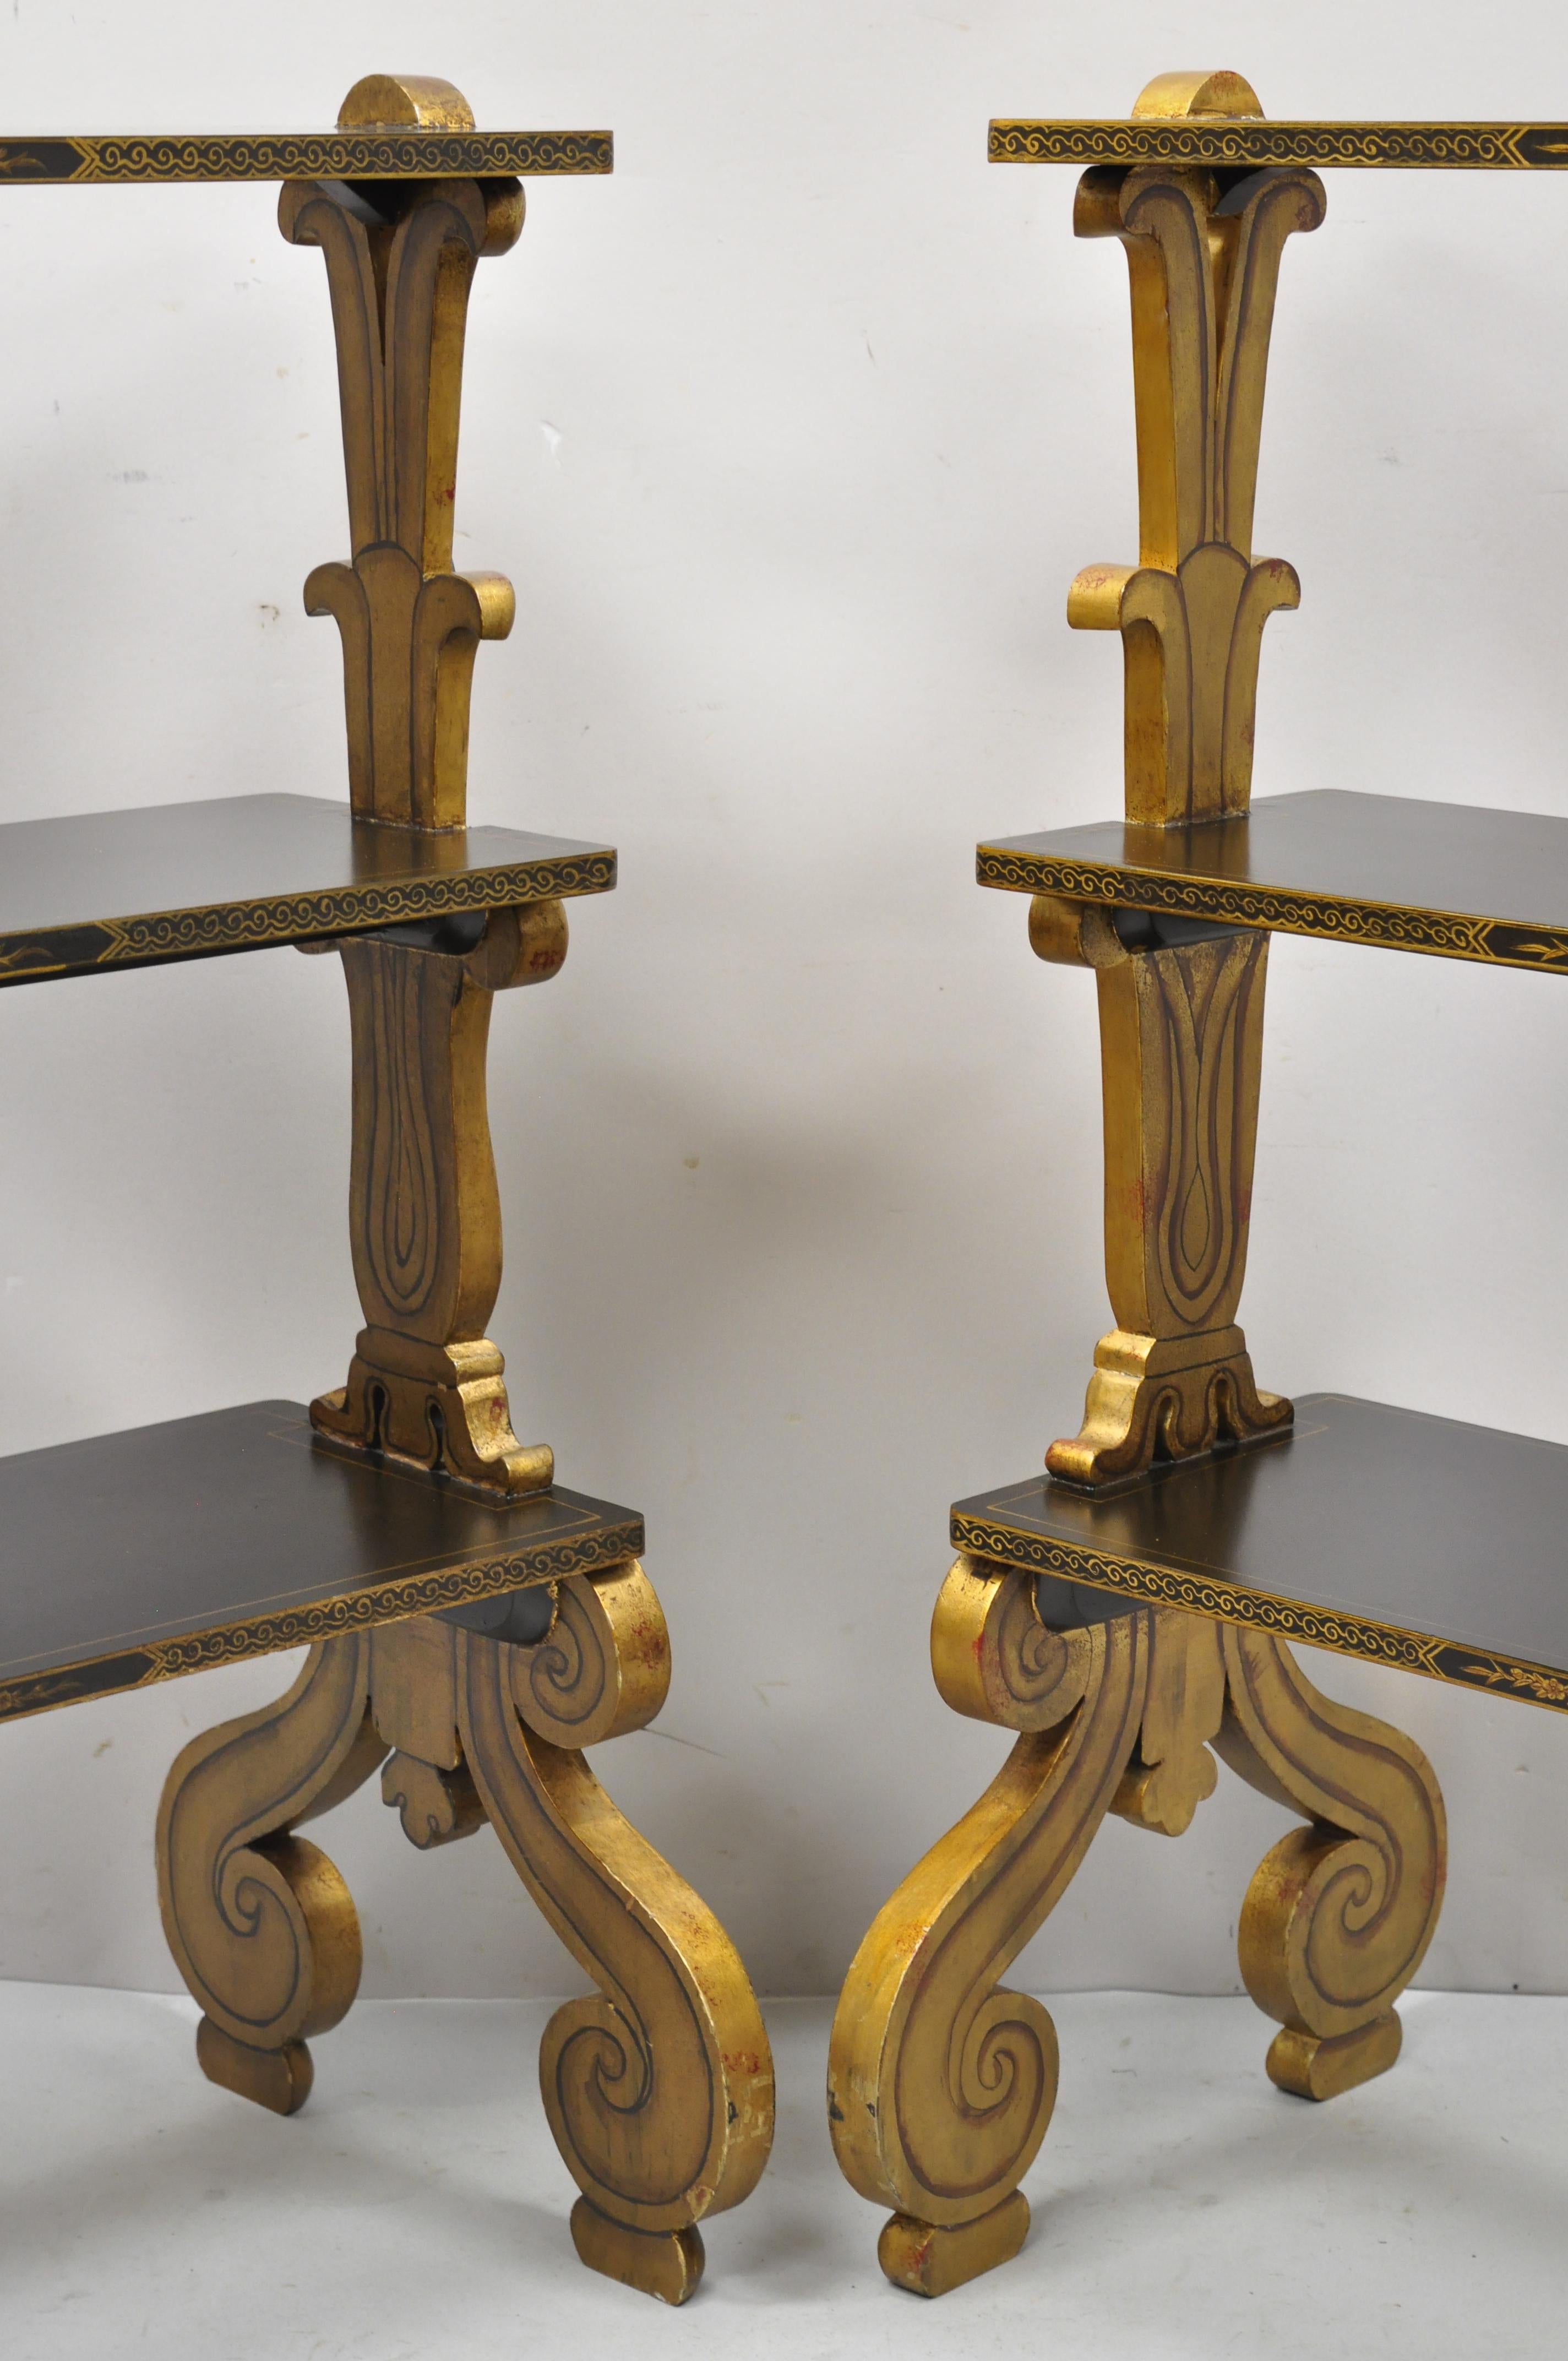 Regency Style Black & Gold 3 Tier Whatnot Stands Bookcase Shelves Curio, a Pair For Sale 5